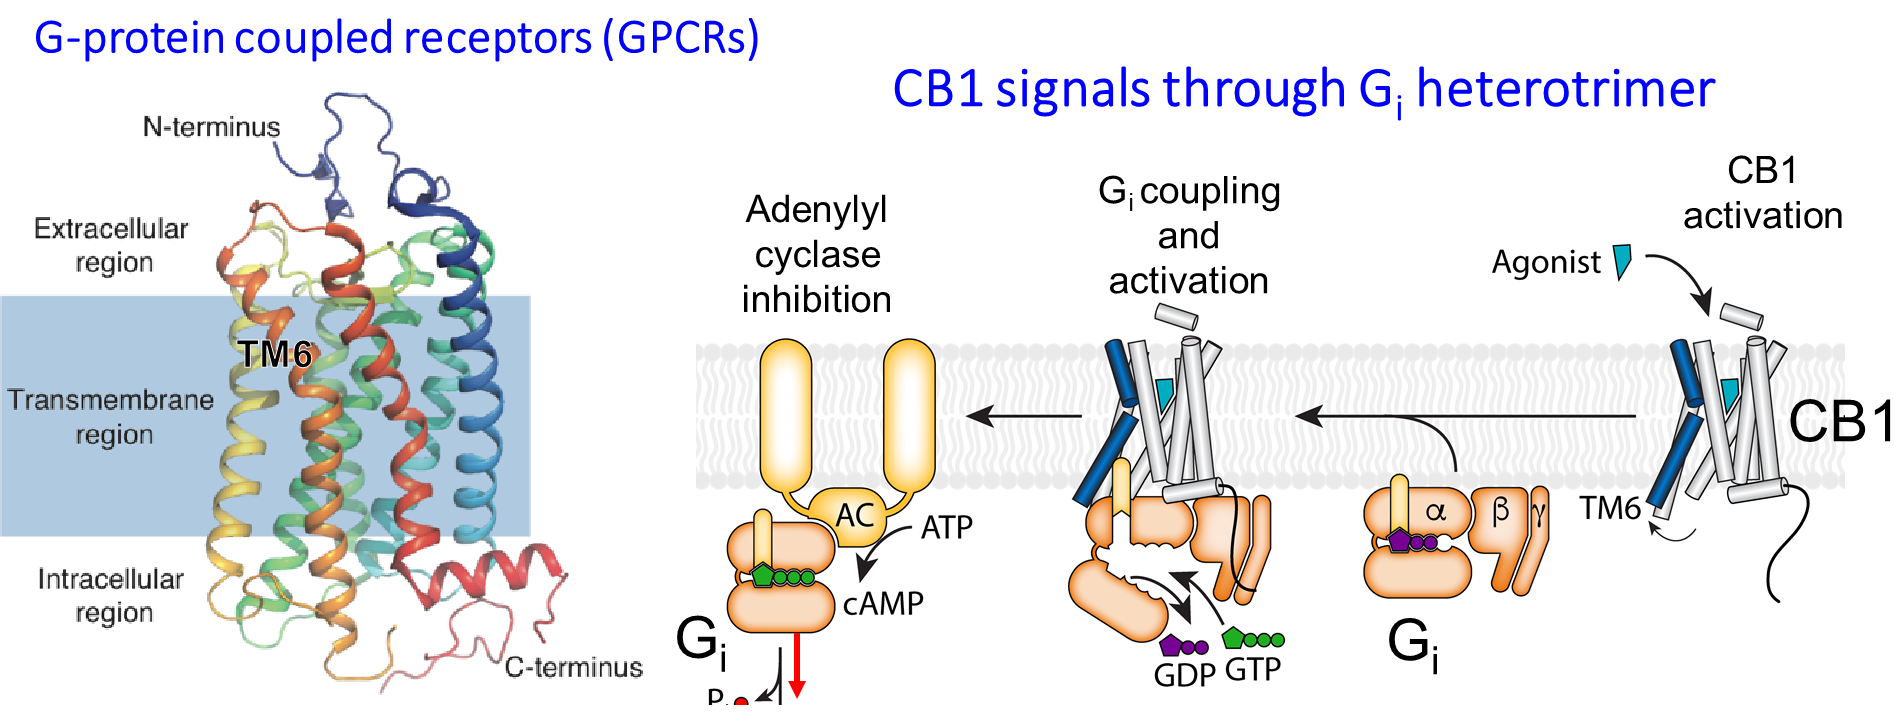 Illustration depicting Illustration of G-protein coupled receptors and CB1 signals through Gi heterotrimer